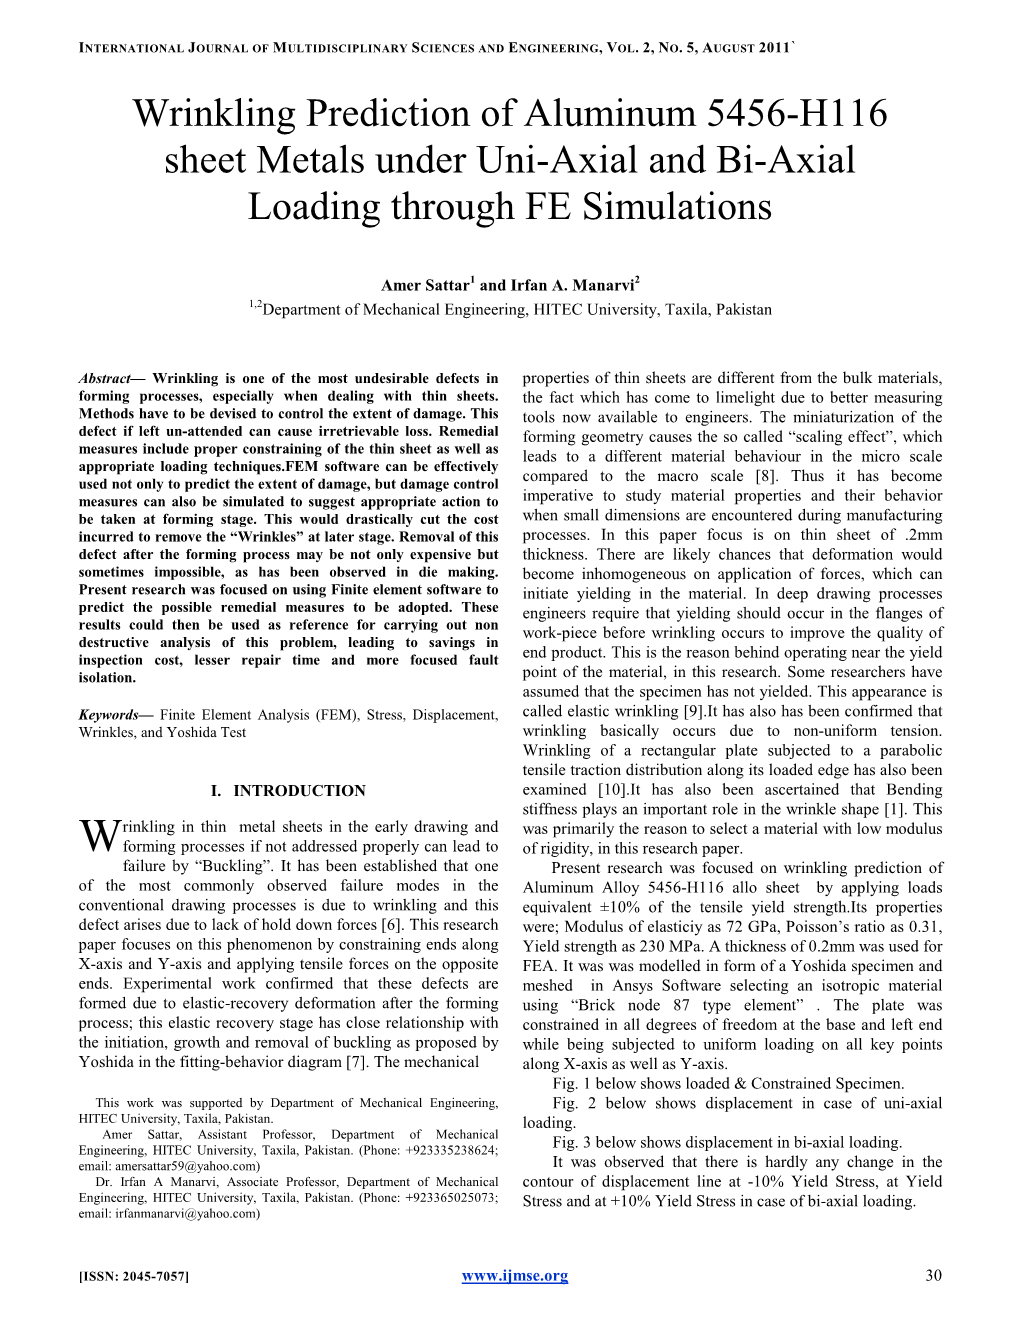 Wrinkling Prediction of Aluminum 5456-H116 Sheet Metals Under Uni-Axial and Bi-Axial Loading Through FE Simulations